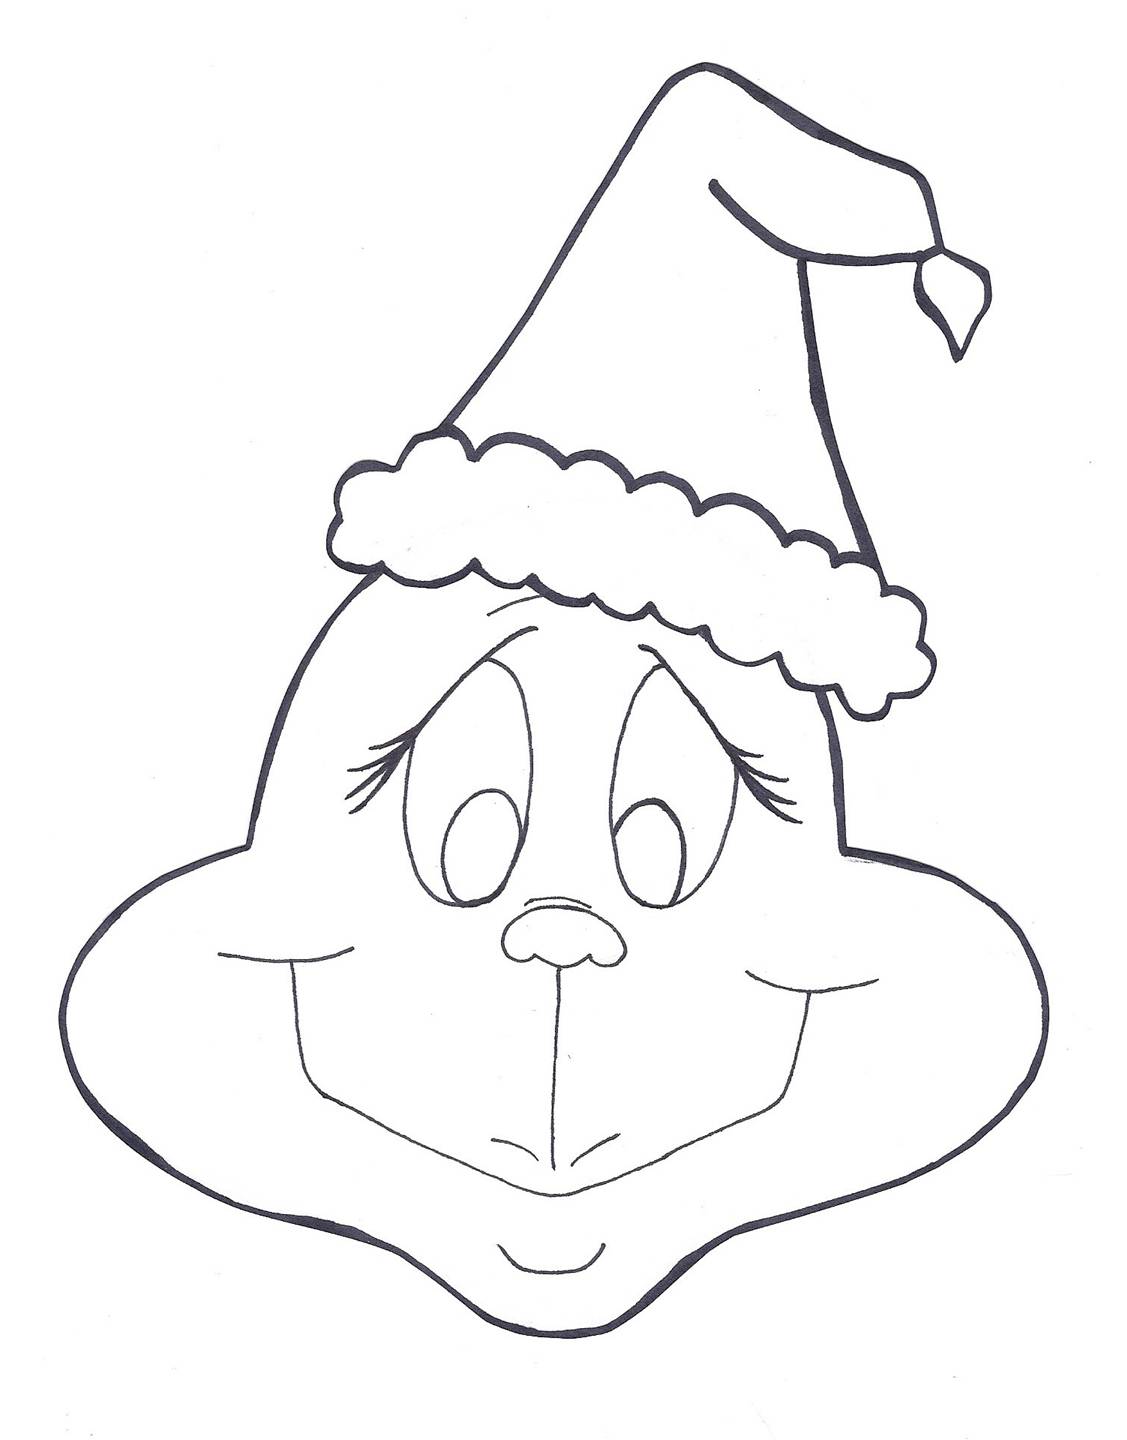 Not so scary grinch coloring page